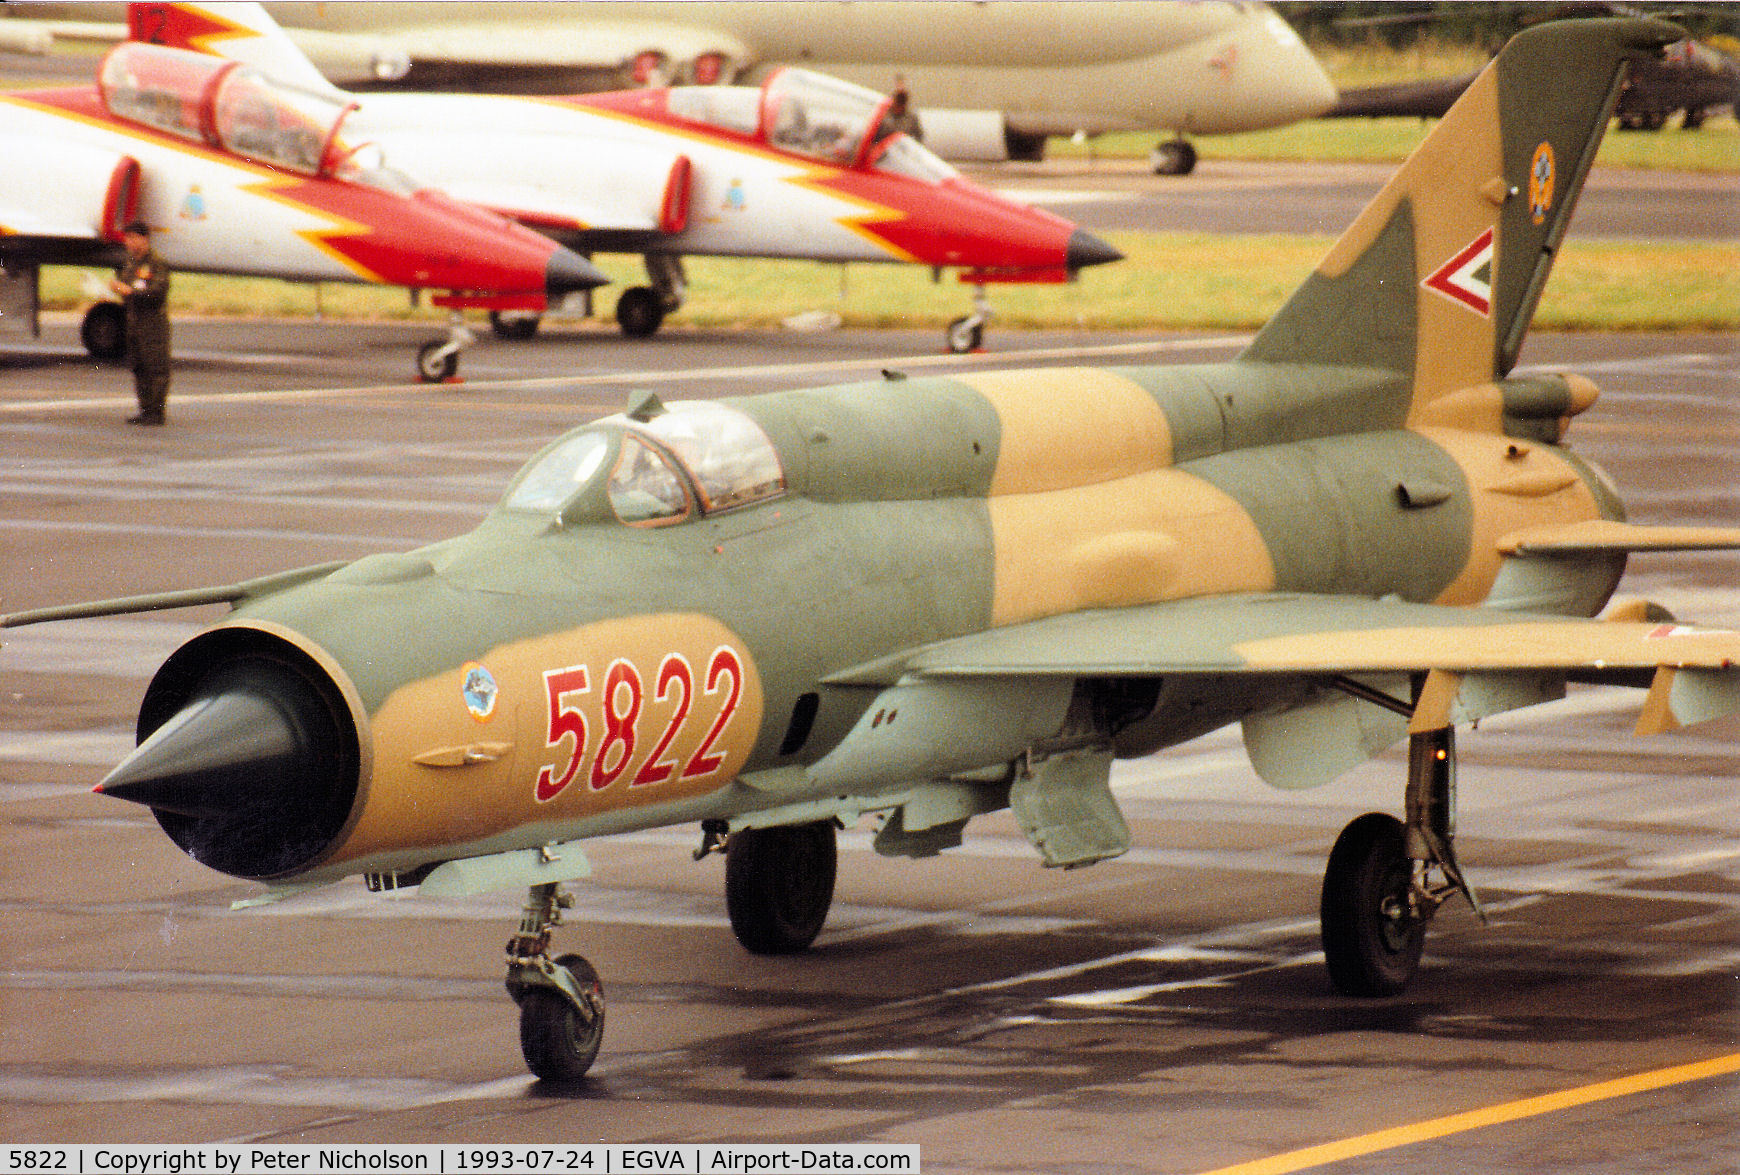 5822, Mikoyan-Gurevich MiG-21bis C/N 75035822, MiG-21 Fishbed of the Sky Hussars, the Hungarian Air Force display team, taxying to the active runway at the 1993 Intnl Air Tattoo at RAF Fairford.